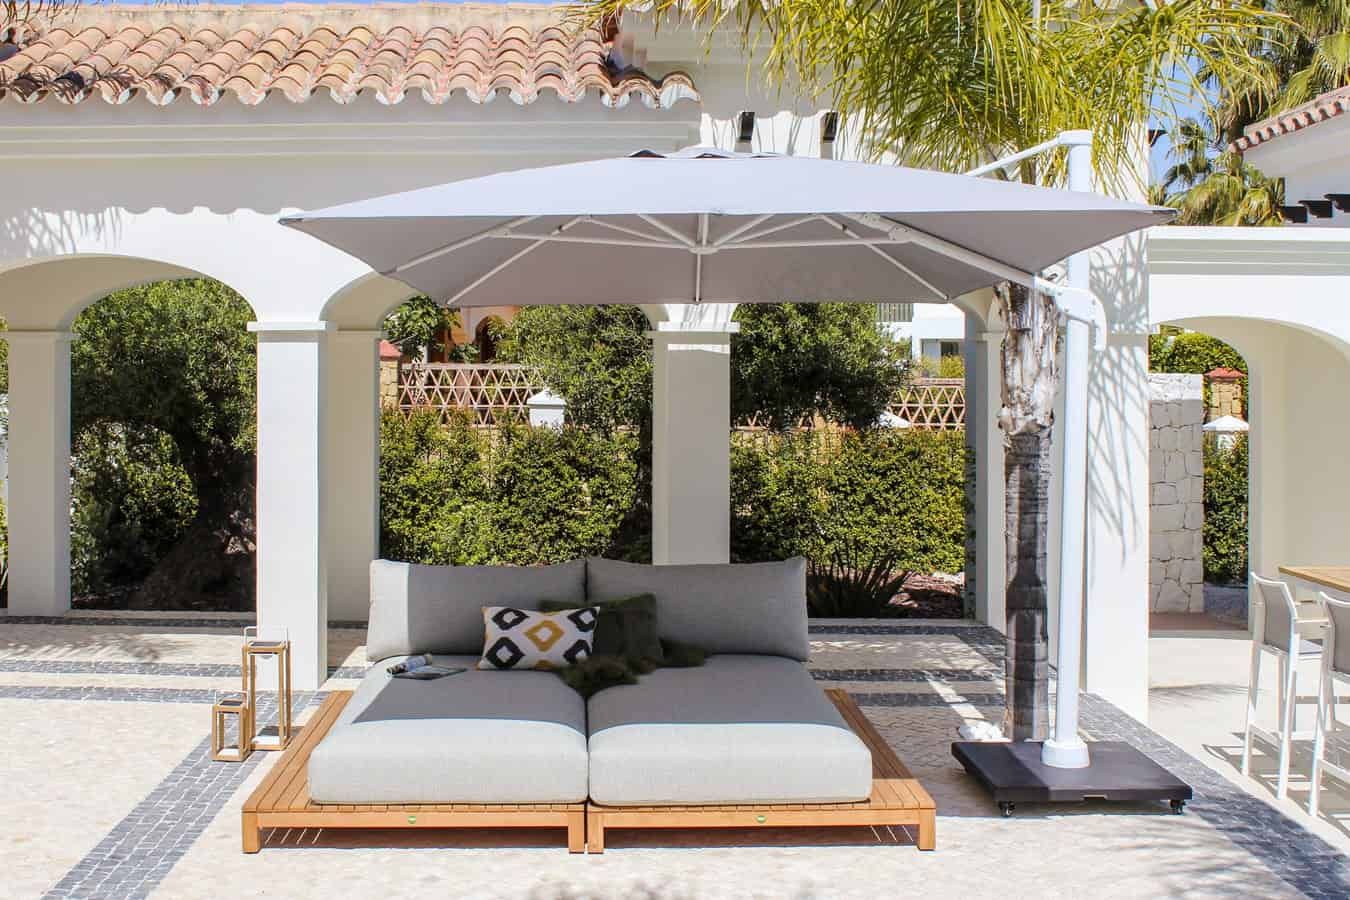 Builded with First-Class Material: SunsLifestyle Pantalla SUNS Lifestyle Garden Parasol - outdoor parasol - garden parasol - outdoor umbrella - umbrella - garden umbrella - garden shade - shade - outdoor shade - Designer garden - Designer garden furniture - Designer garden set - Designer outdoor chairs - Designer outdoor daybed - Designer outdoor furniture Lifestyle furniture - Outdoor lifestyle furniture - lifestyle garden furniture - Outdoor furniture shop - Garden furniture shop - Garden furniture shop - Outdoor furniture - Sunbrella - Sunbrella fabric - Sunbrella furniture - Sunbrella garden furniture - Sensotex - Sensotex fabric - Sensotex furniture - Textaline - outdoor sofa set - outdoor dining - outdoor lounge - garden sofa set - garden lounge - garden dining - alfresco - garden sofa - garden chair - day bed - daybed - sun lounger - sunbed - sun bed - outdoor space - waterproof - weatherproof - weather resistant - weather resillient - quick dry foam - teak - garden table - garden chair - outdoor table - outdoor chair - outdoor bar - aluminium - hardwood - ,Furniture